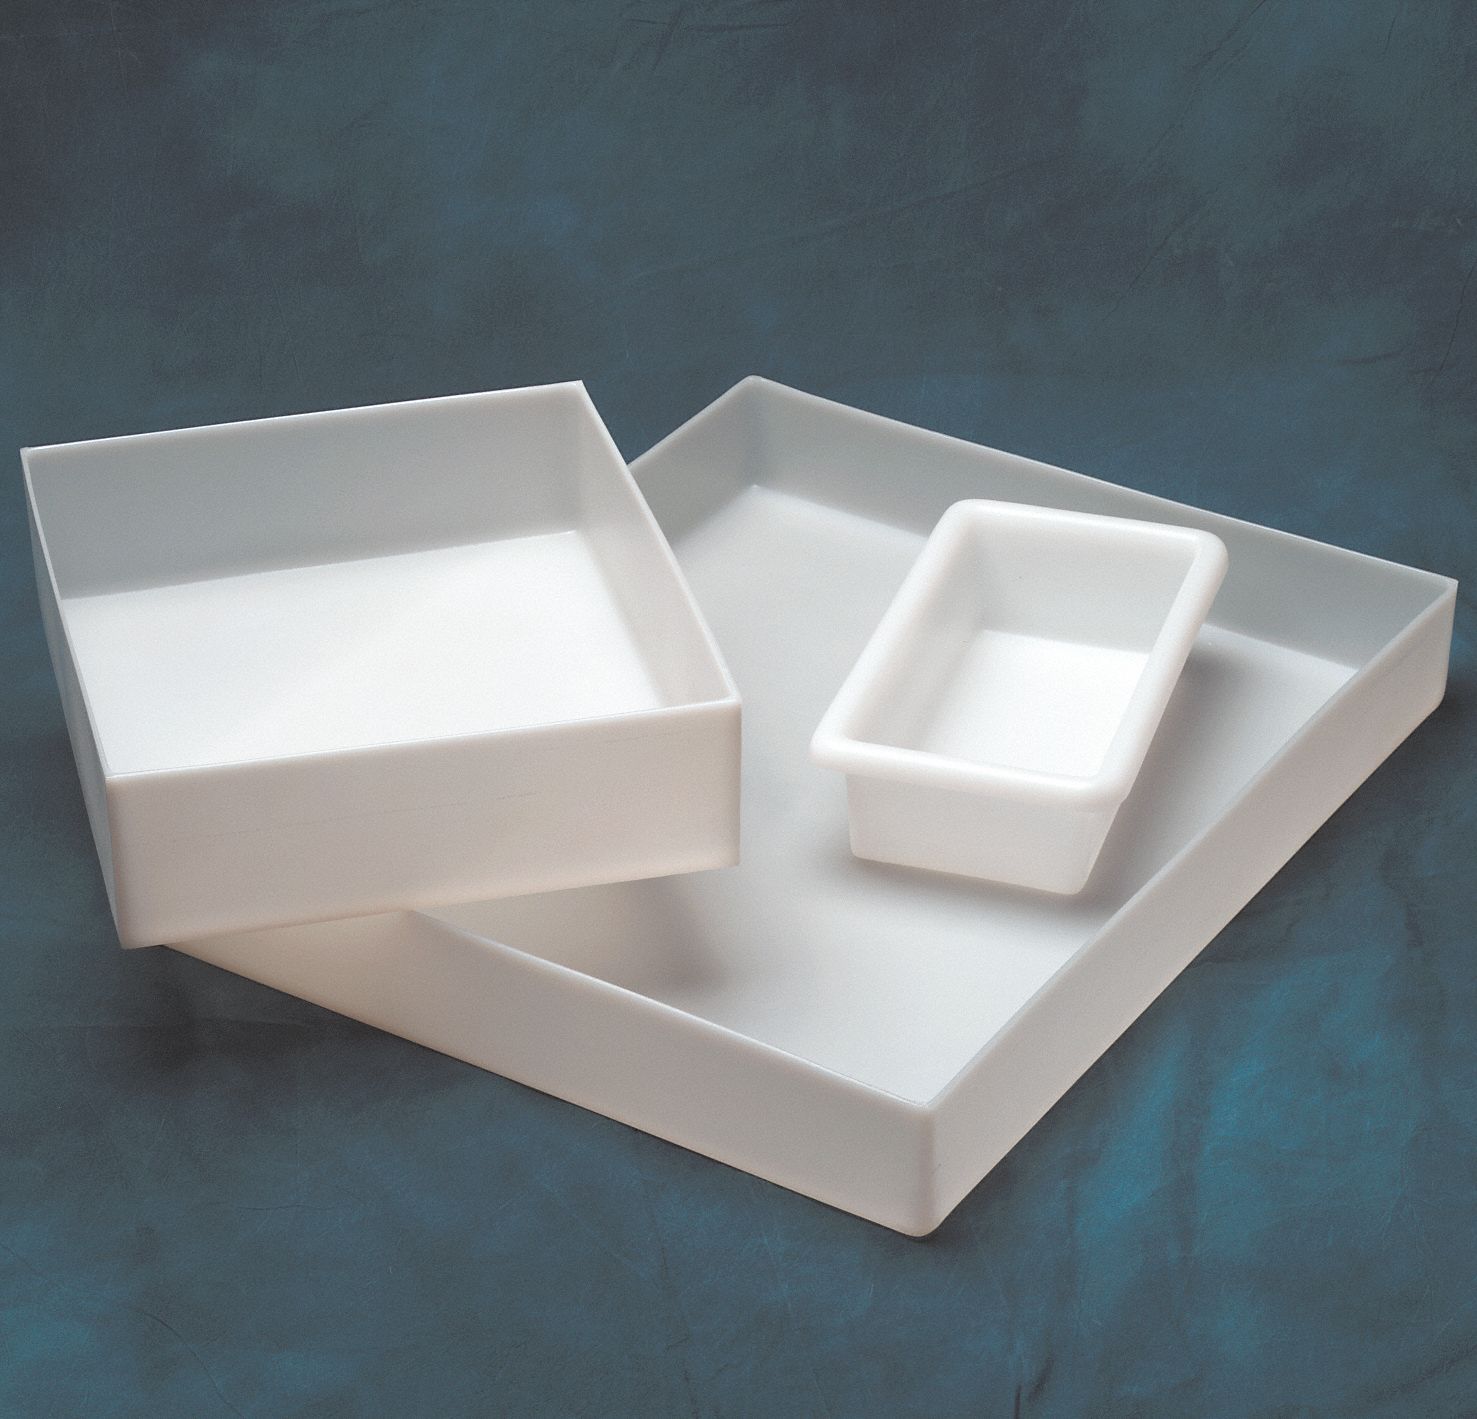 Straight Lip Tray: 15 qt Capacity, 17 1/2 in Overall Lg, 15 1/2 in Overall Wd, HDPE